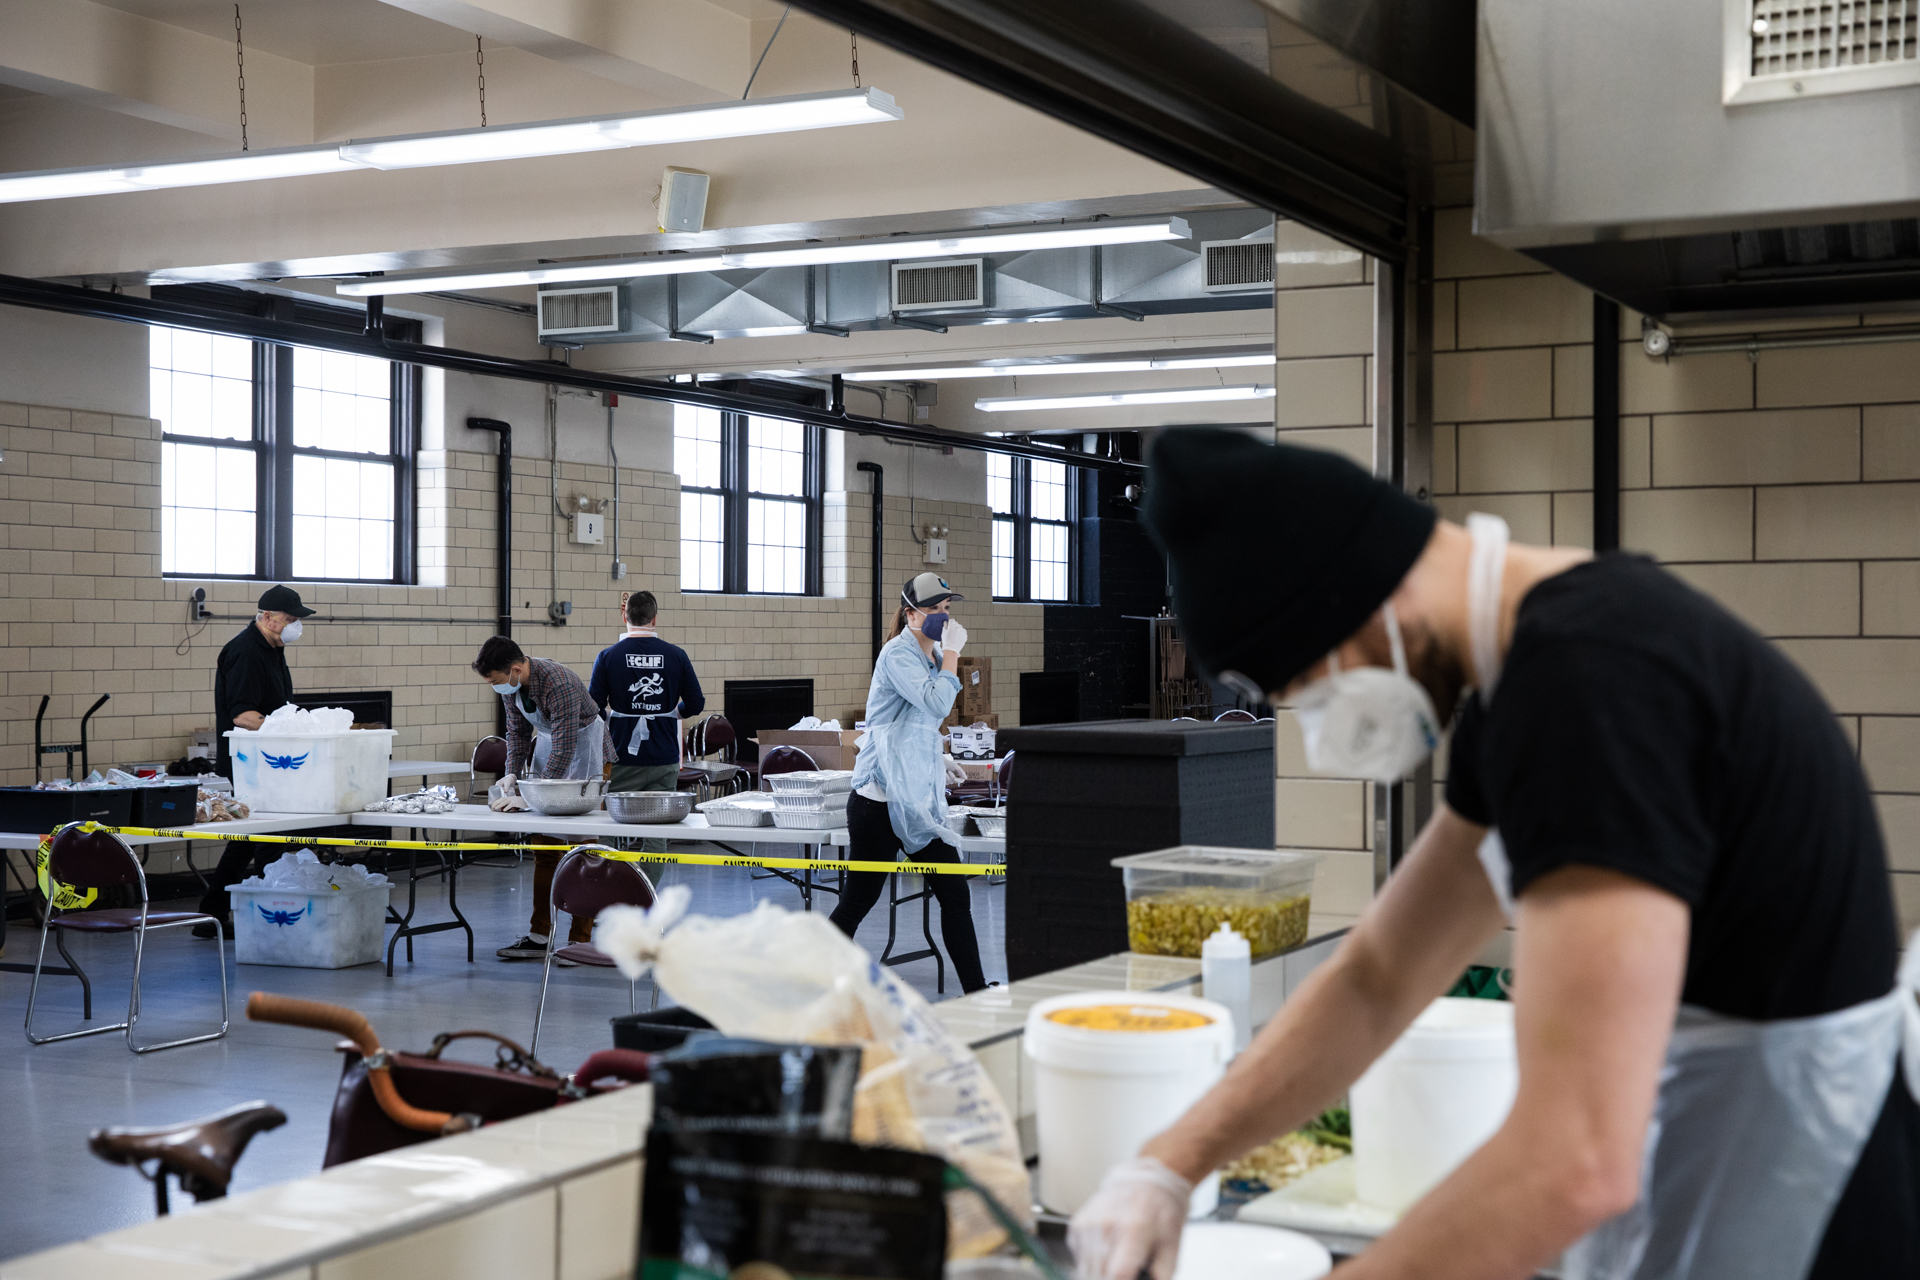 The North Brooklyn Angels work out of Our Lady of Mount Carmel on April 6, 2020. Since the coronavirus pandemic has caused a wave of unemployment, demand for food has increased for the mobile soup kitchen. Photo: Paul Frangipane/Brooklyn Eagle